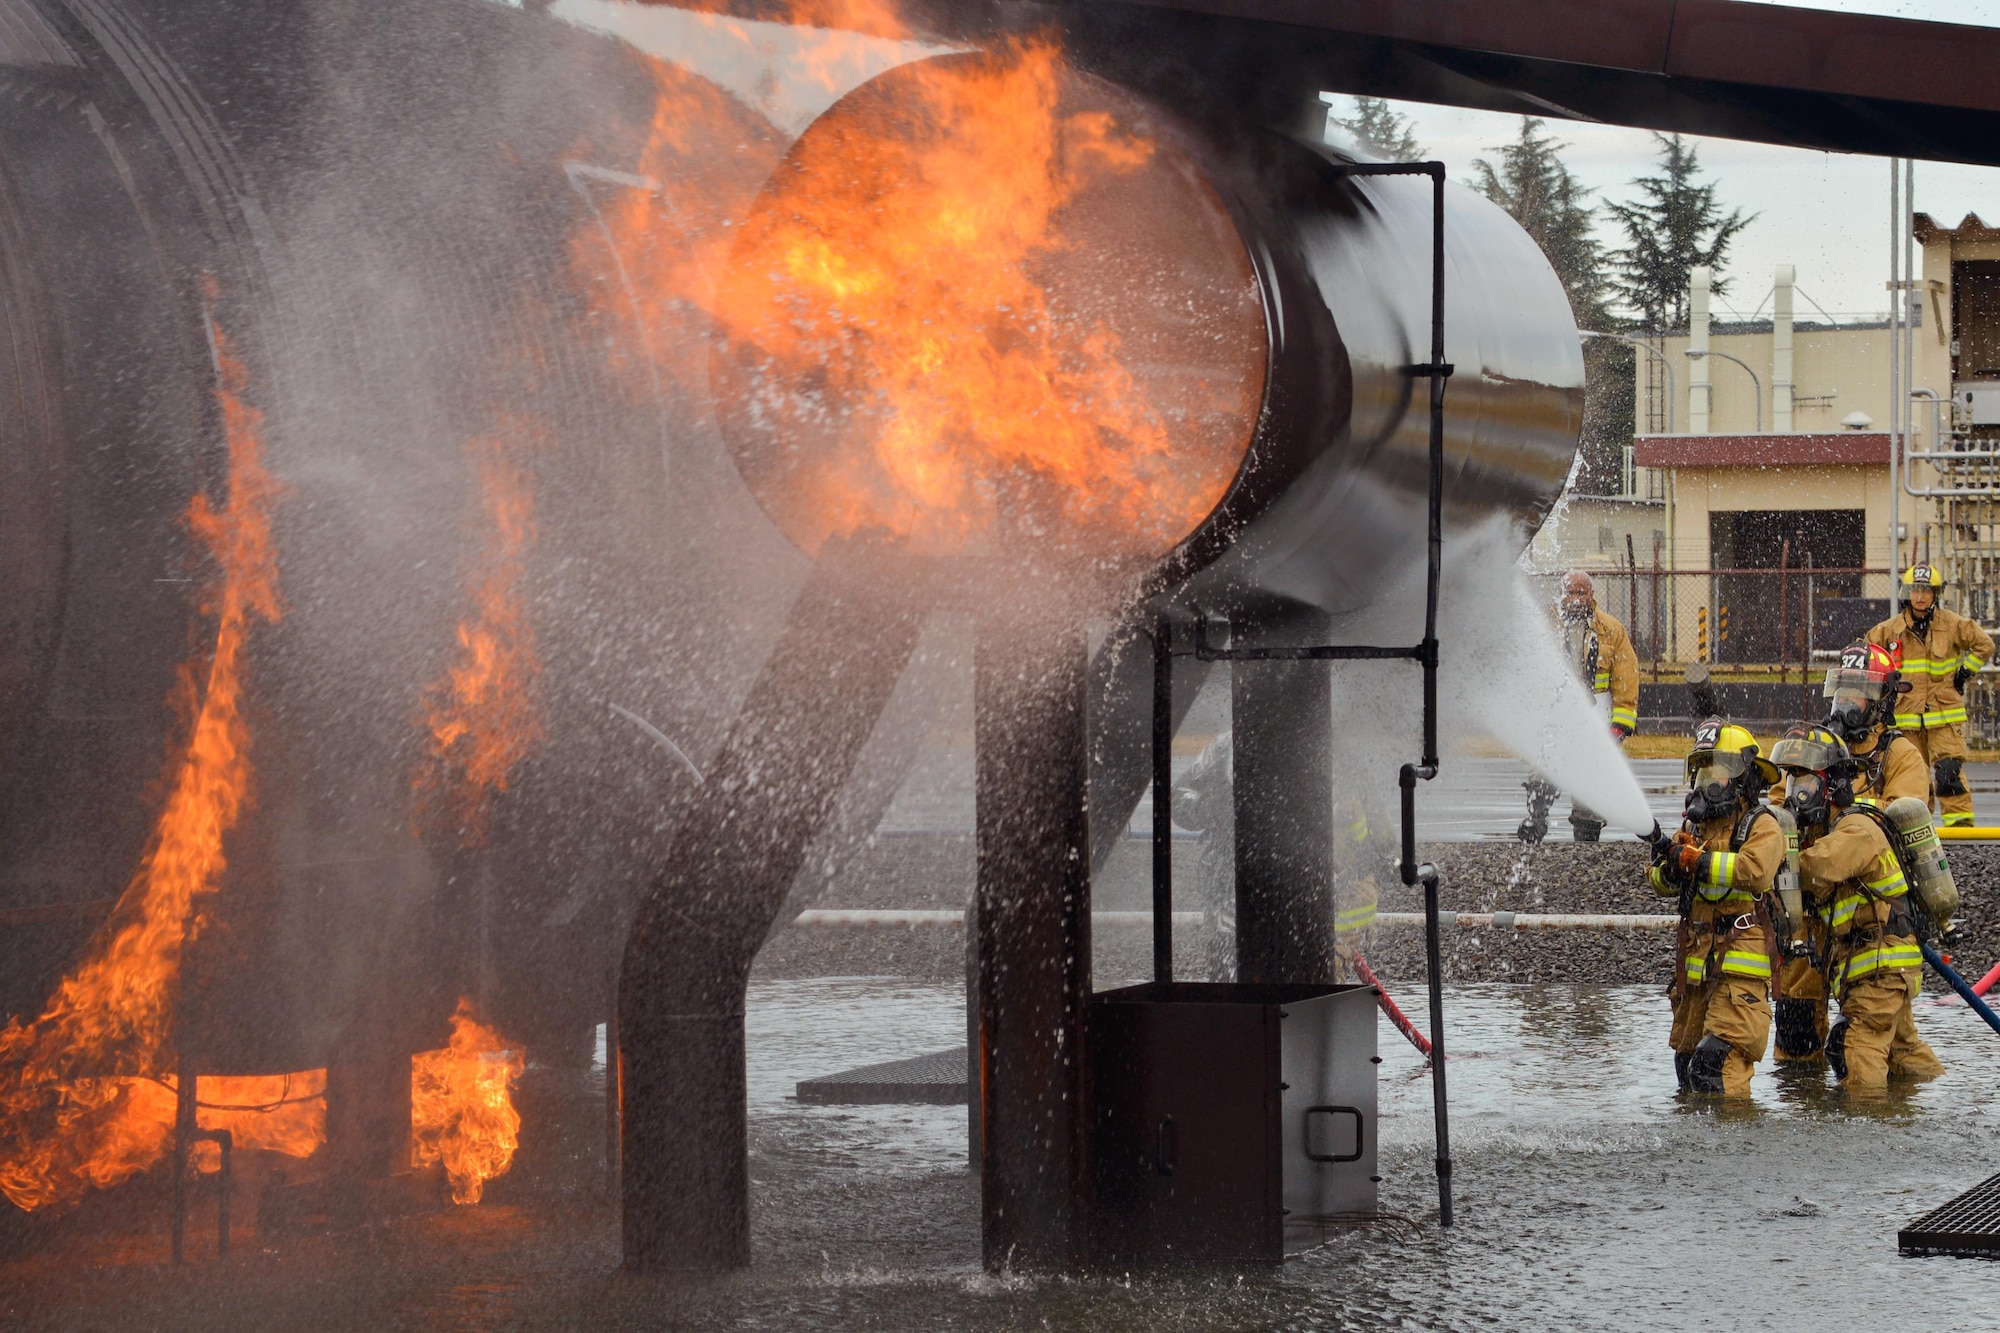 Firefighters with the 374th Civil Engineer Squadron put out a simulated aircraft fire during a training scenario at Yokota Air Base, Japan, Dec. 14, 2016. The training consisted of a training aircraft burning with two engine fires with leaking fuel spreading on the ground to simulate an aircraft on the runway needing assistance. (U.S. Air Force photo by Staff Sgt. David Owsianka)